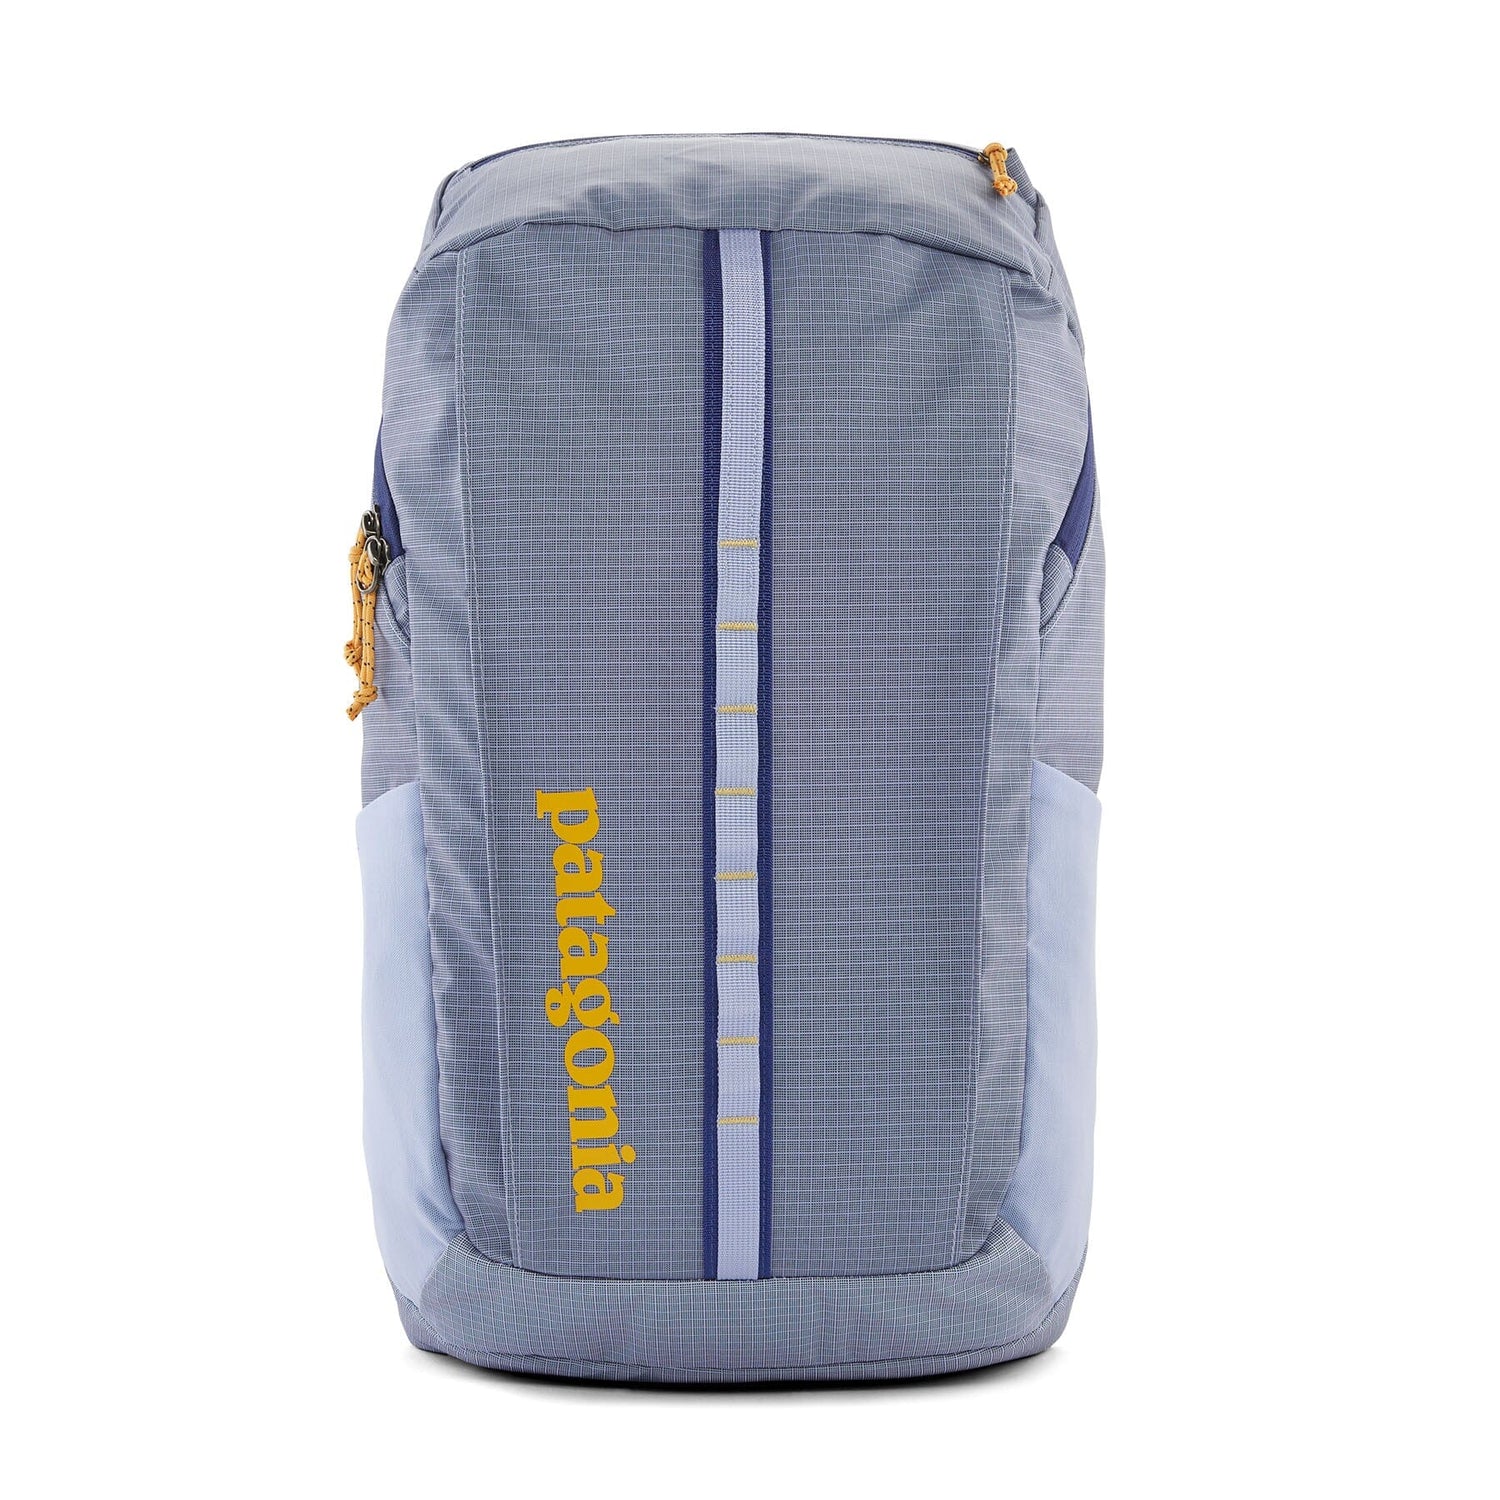 Patagonia Black Hole Pack 25L - 100% Recycled Polyester Pale Periwinkle Bags